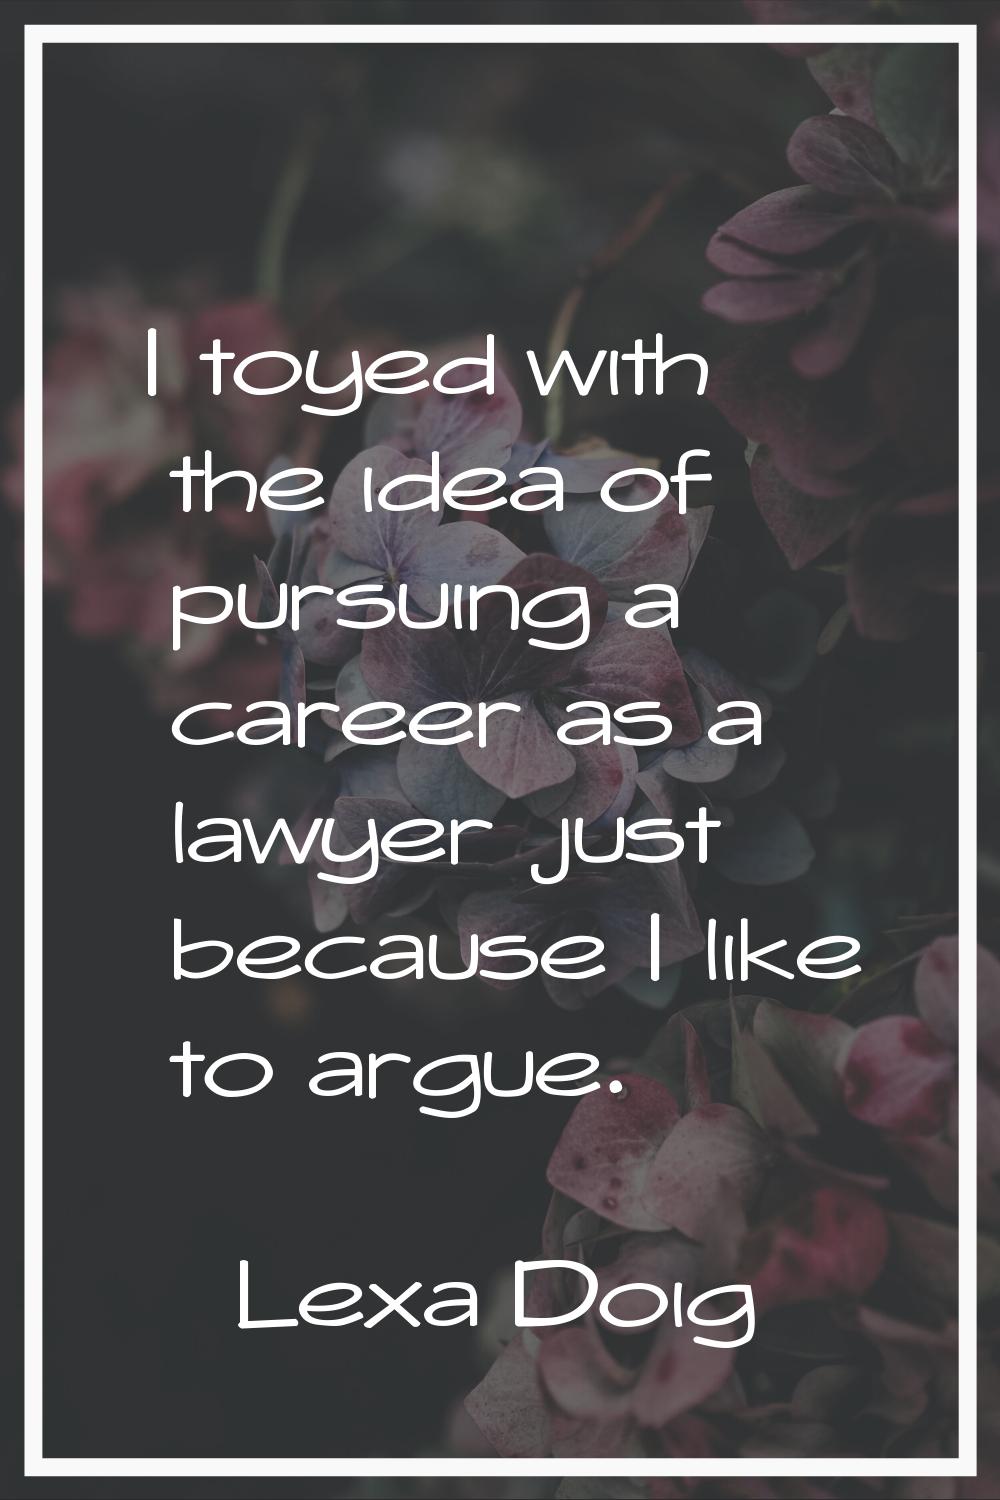 I toyed with the idea of pursuing a career as a lawyer just because I like to argue.